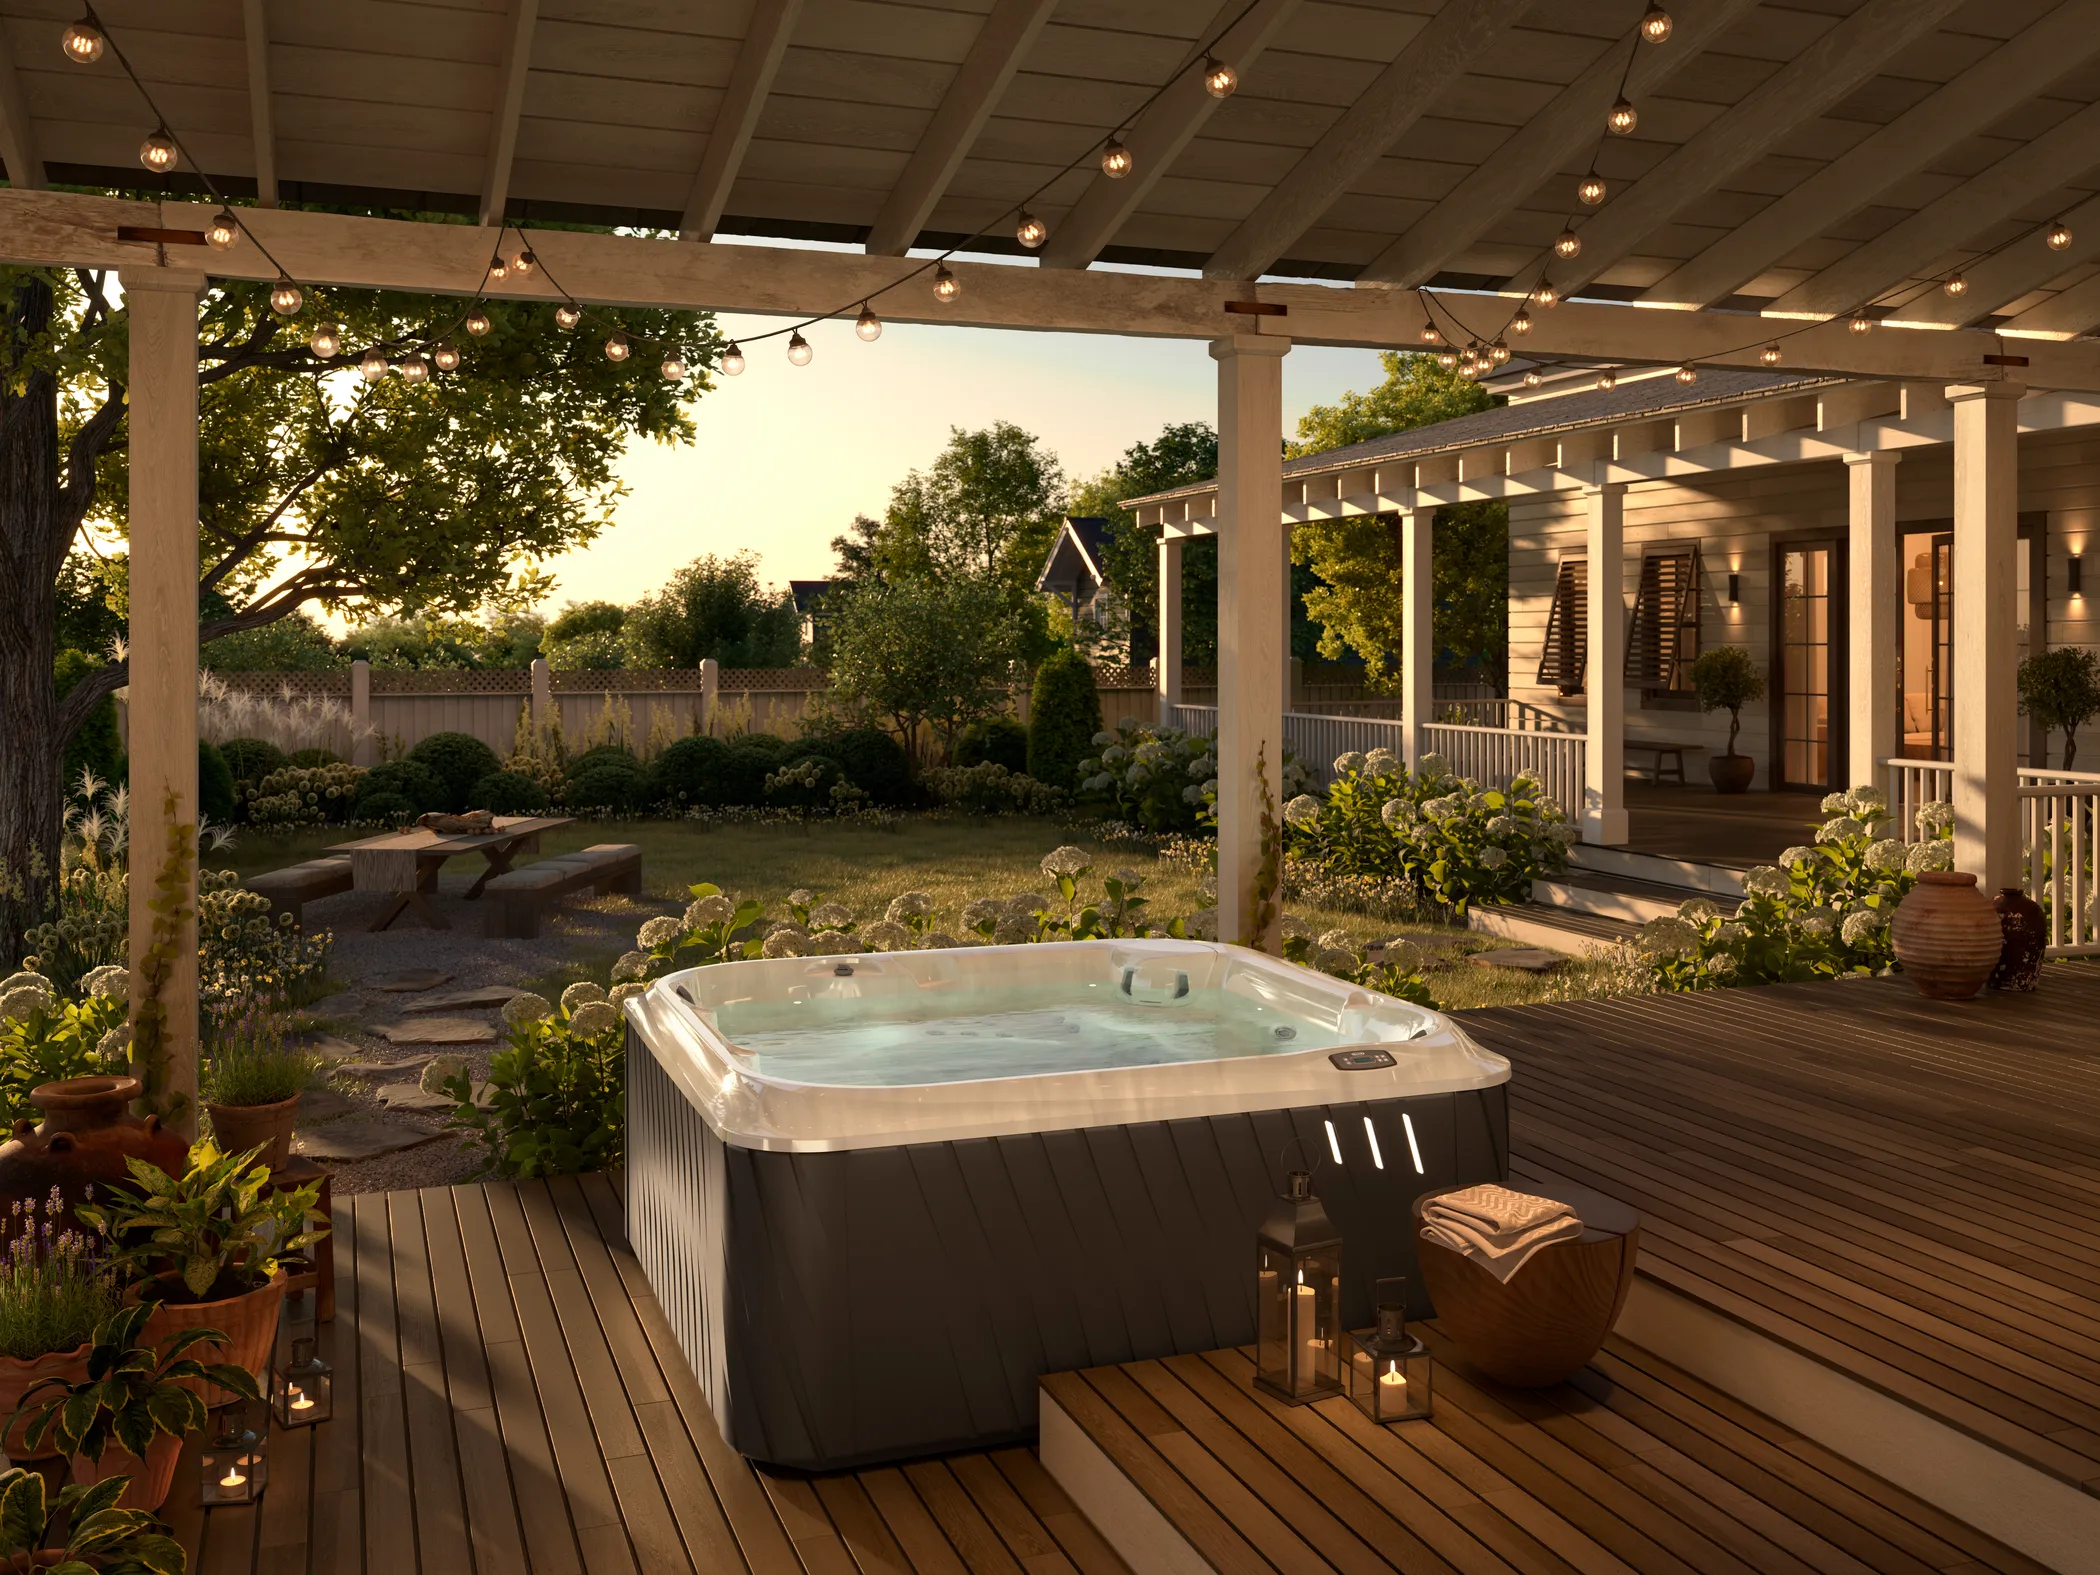 J-285™ FULL-SIZE HOT TUB WITH SEVEN SEATING OPTIONS